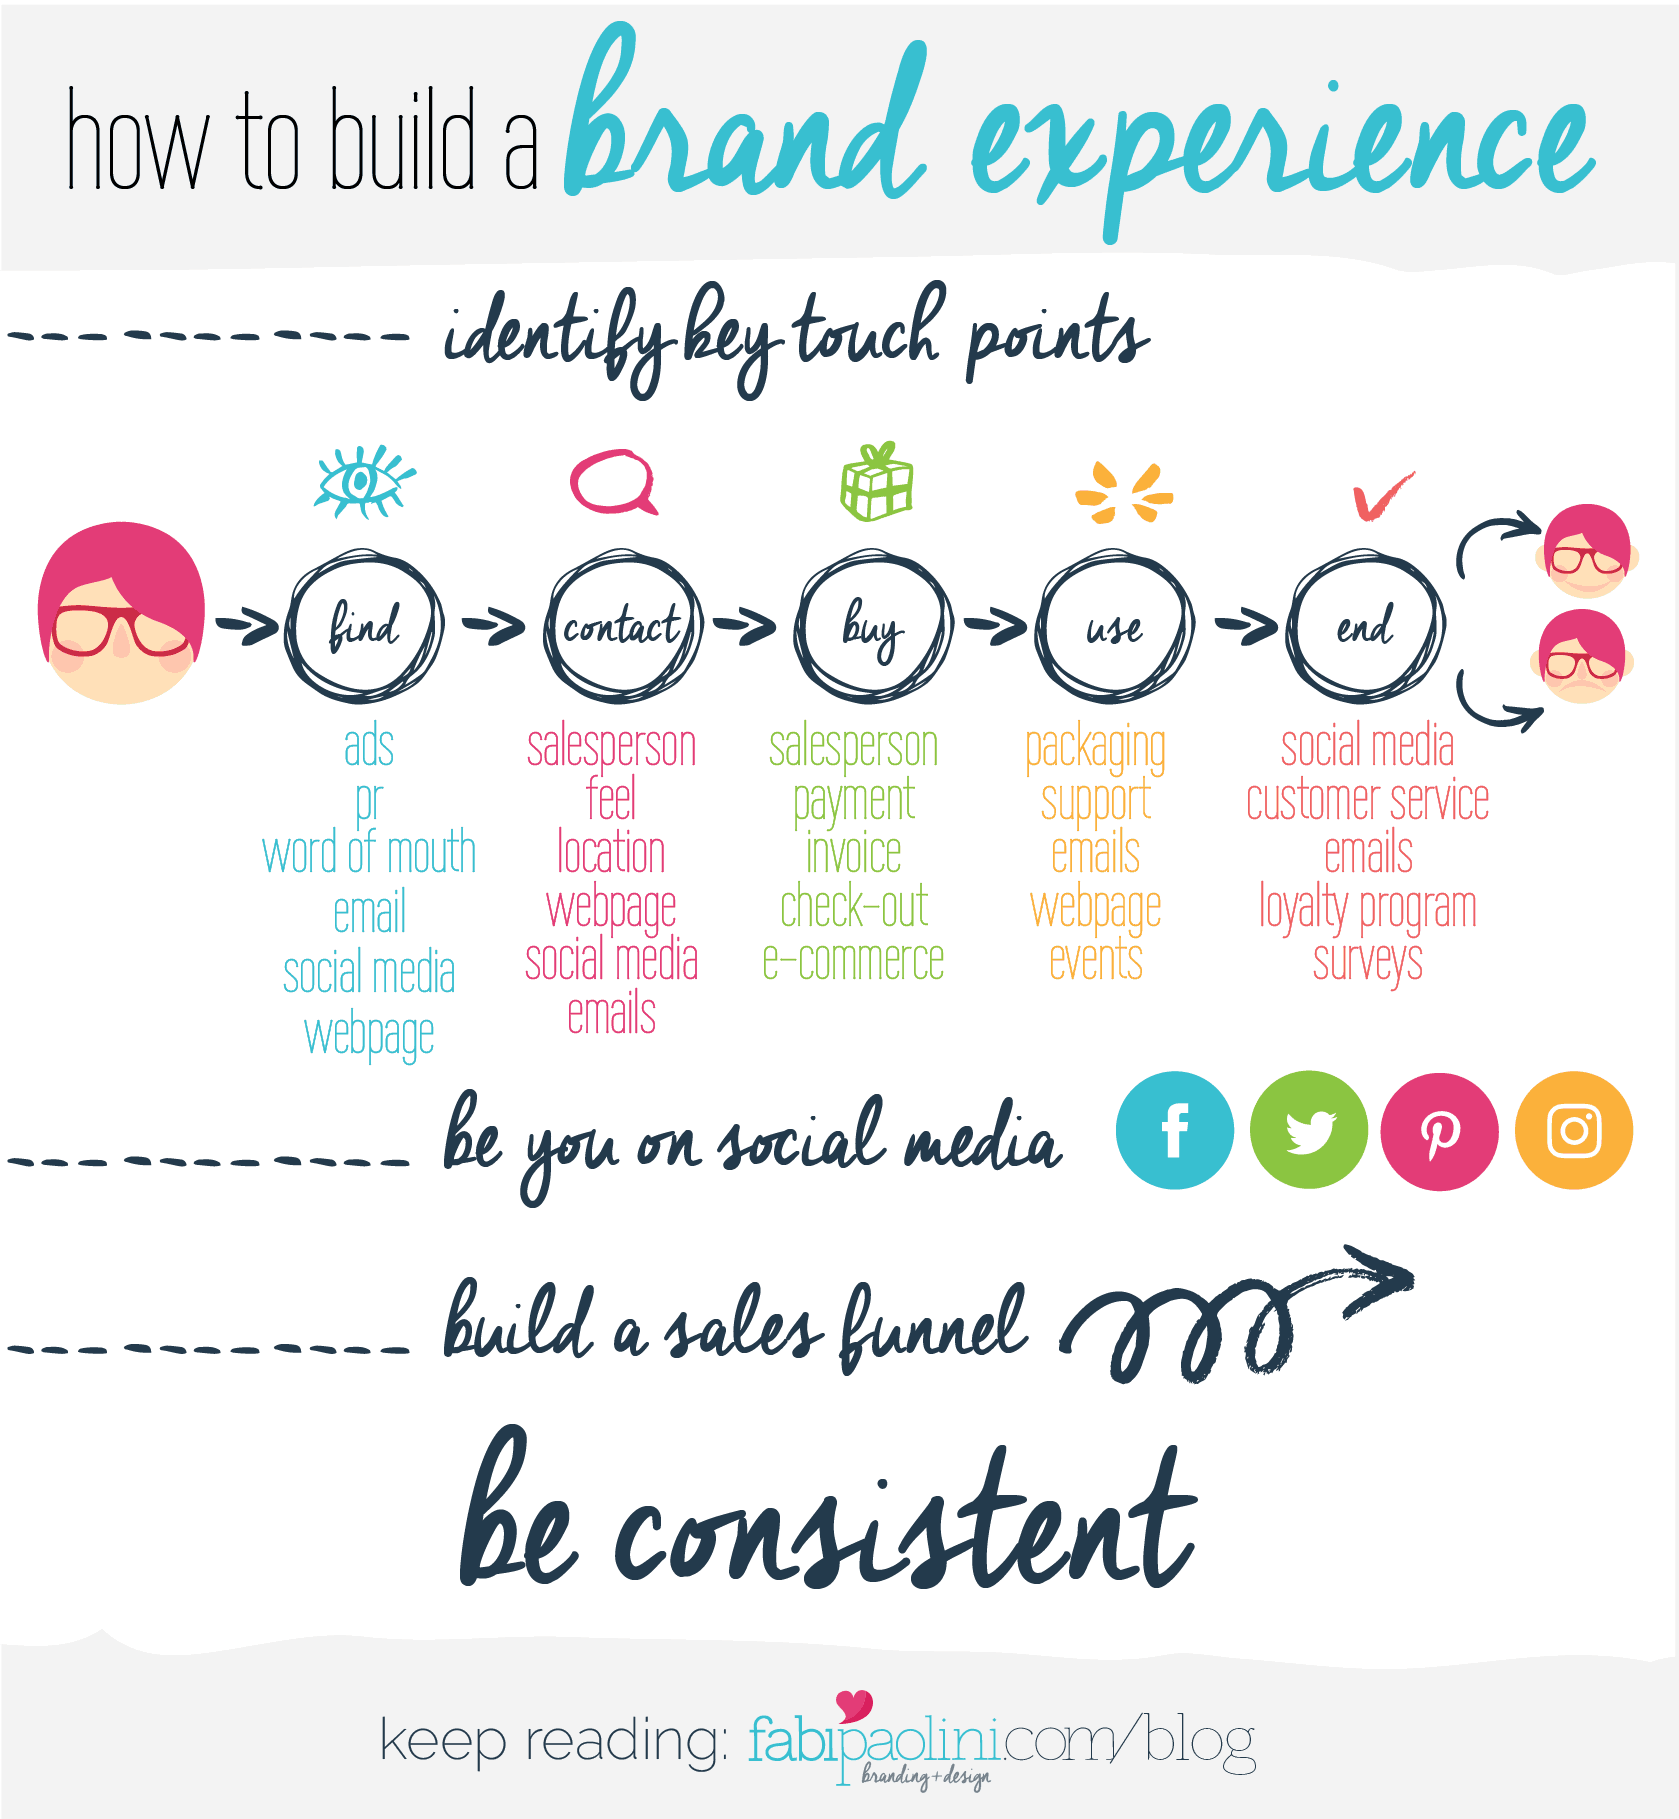 How to build a brand experience. How to brand your business. Part 3